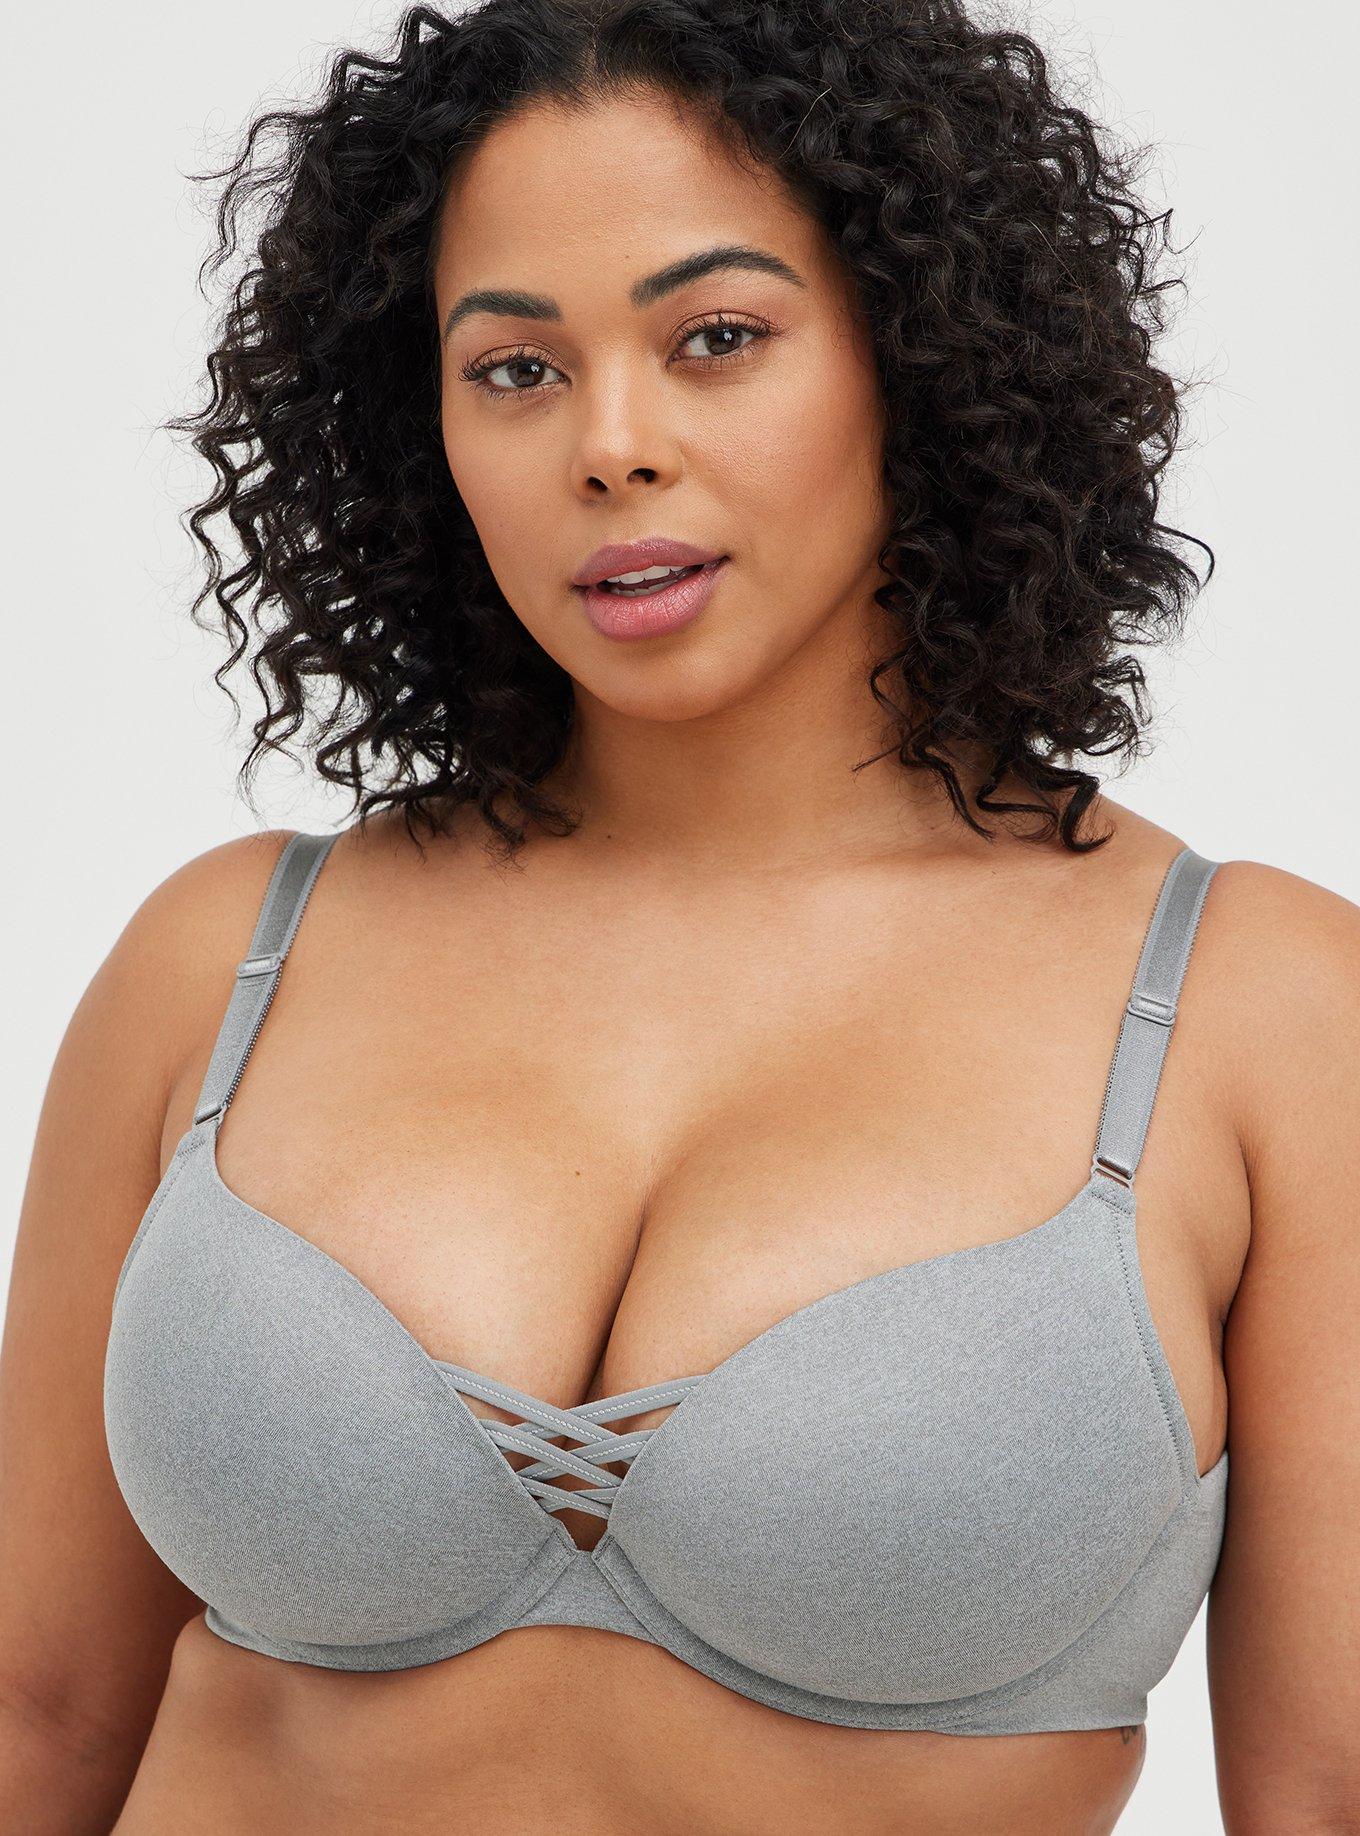 TORRID PUSH-UP WIRE-FREE BRA - GREY WITH 360° BACK SMOOTHING size 42 DDD